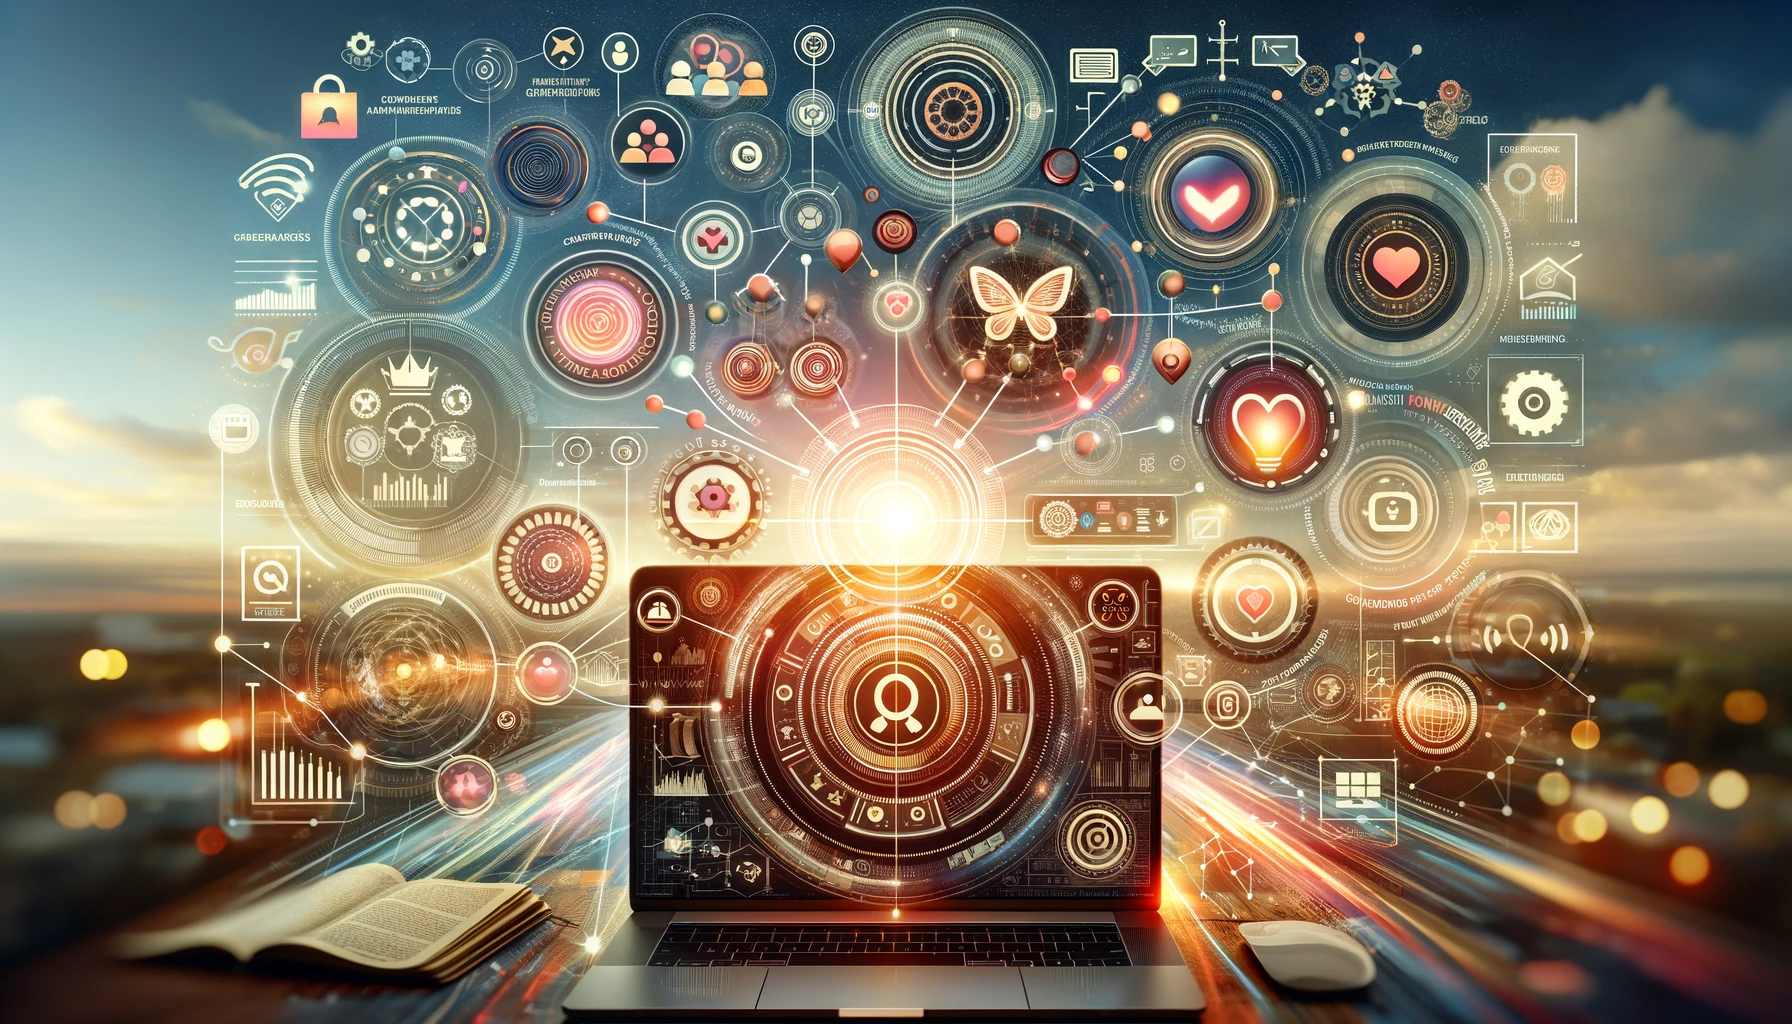 An innovative abstract image highlighting retention marketing strategies, featuring interconnected circles for customer relationships, unique icons for personalized interactions, symbols for loyalty rewards, and digital mechanisms for feedback.